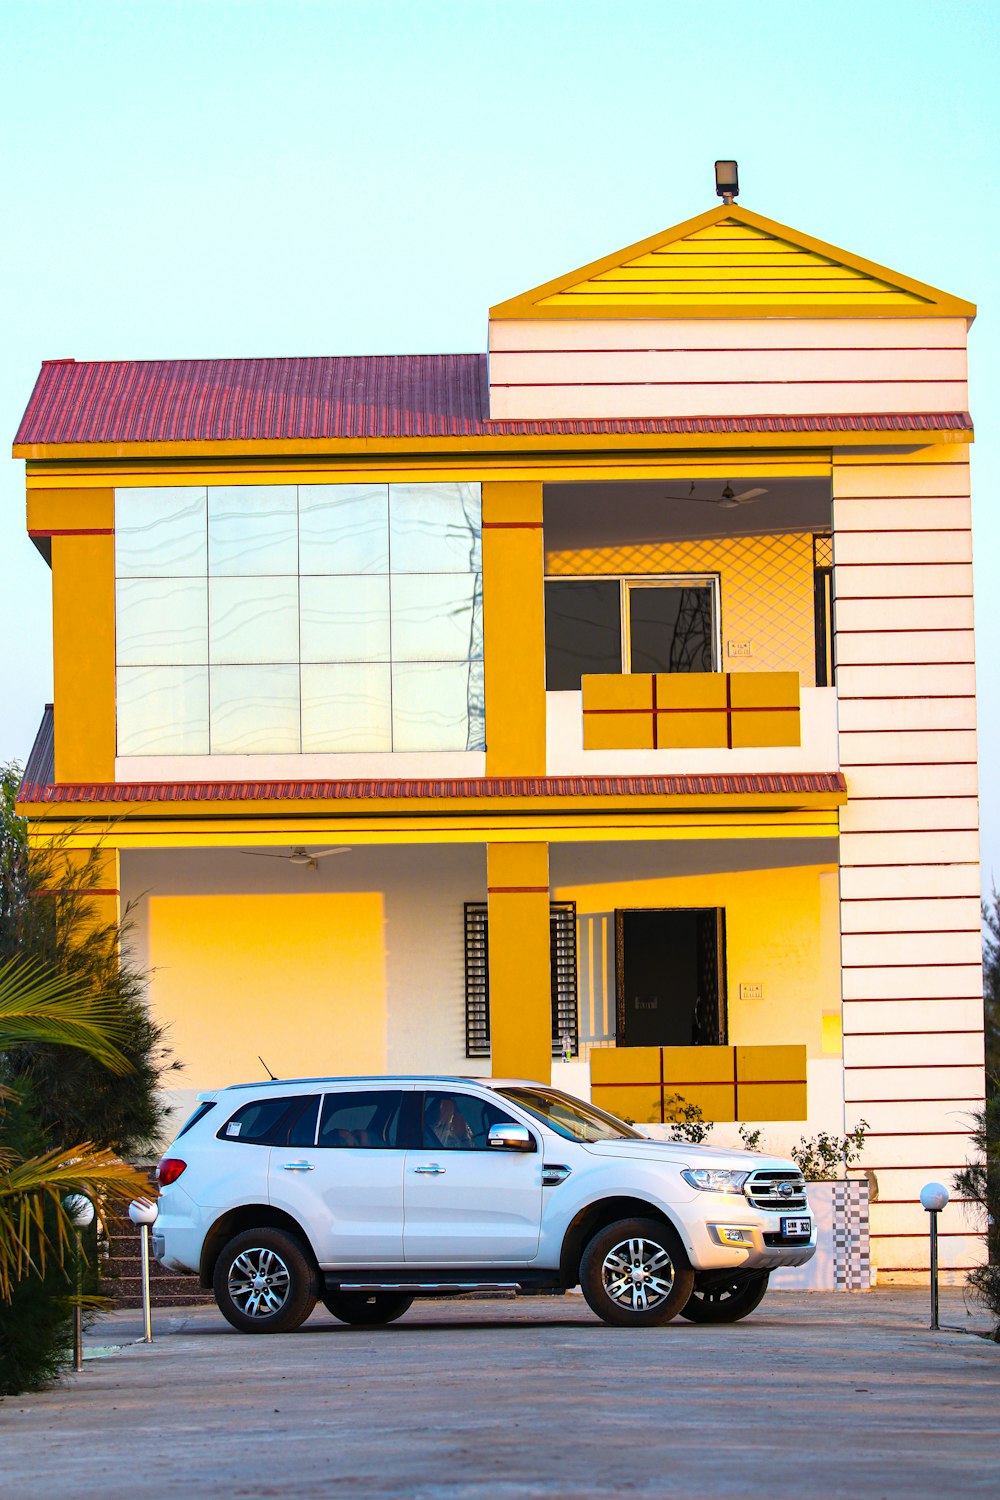 white sedan parked beside white and yellow concrete building during daytime